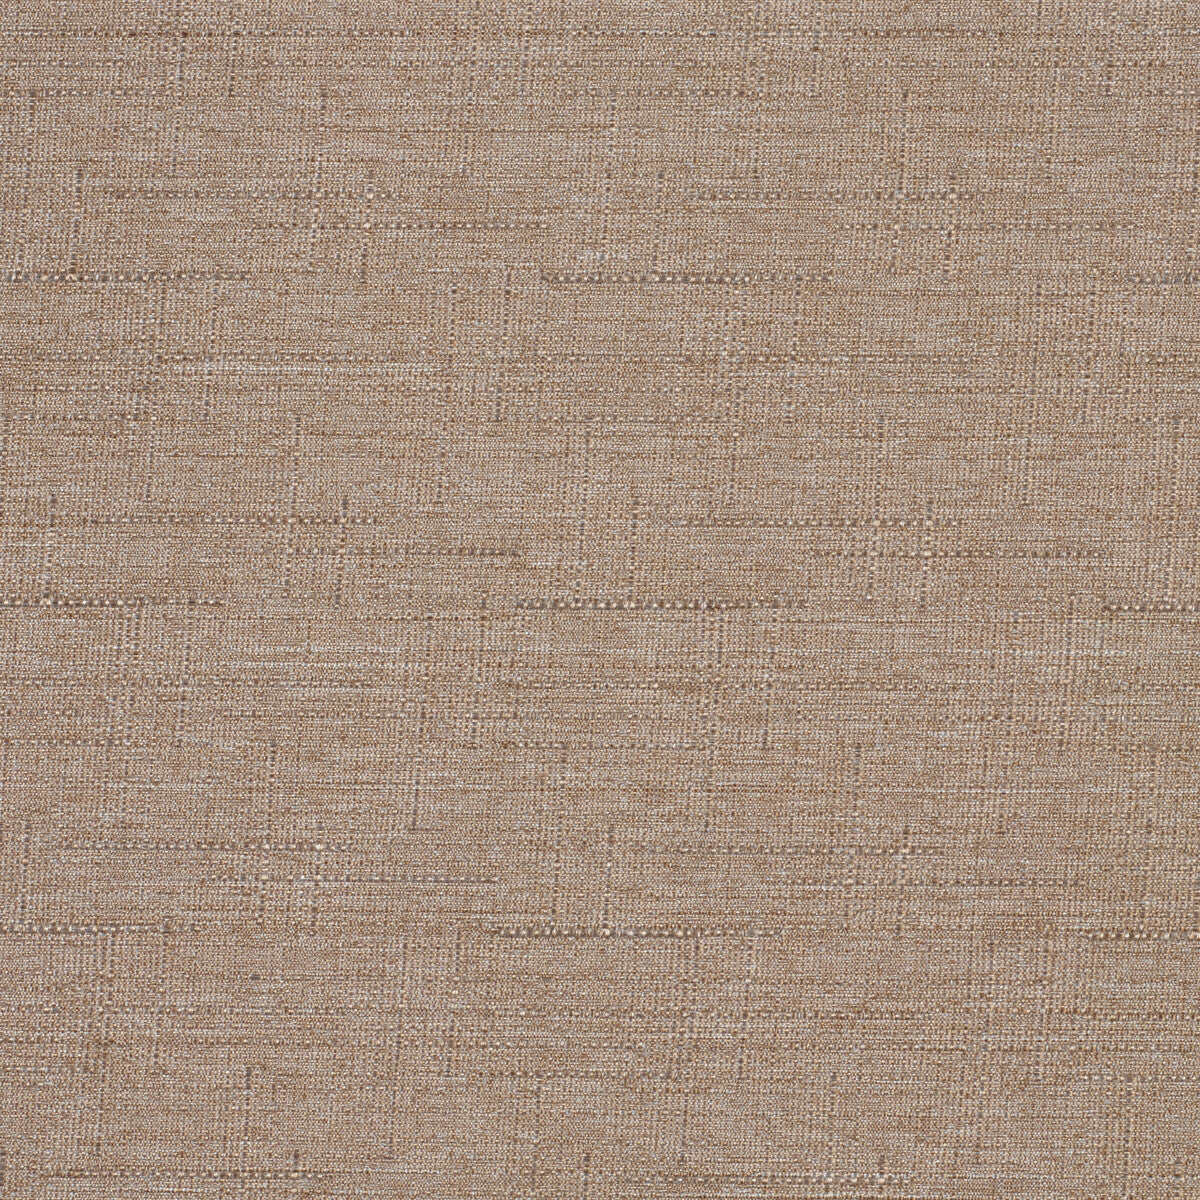 Kravet Contract fabric in 4317-106 color - pattern 4317.106.0 - by Kravet Contract